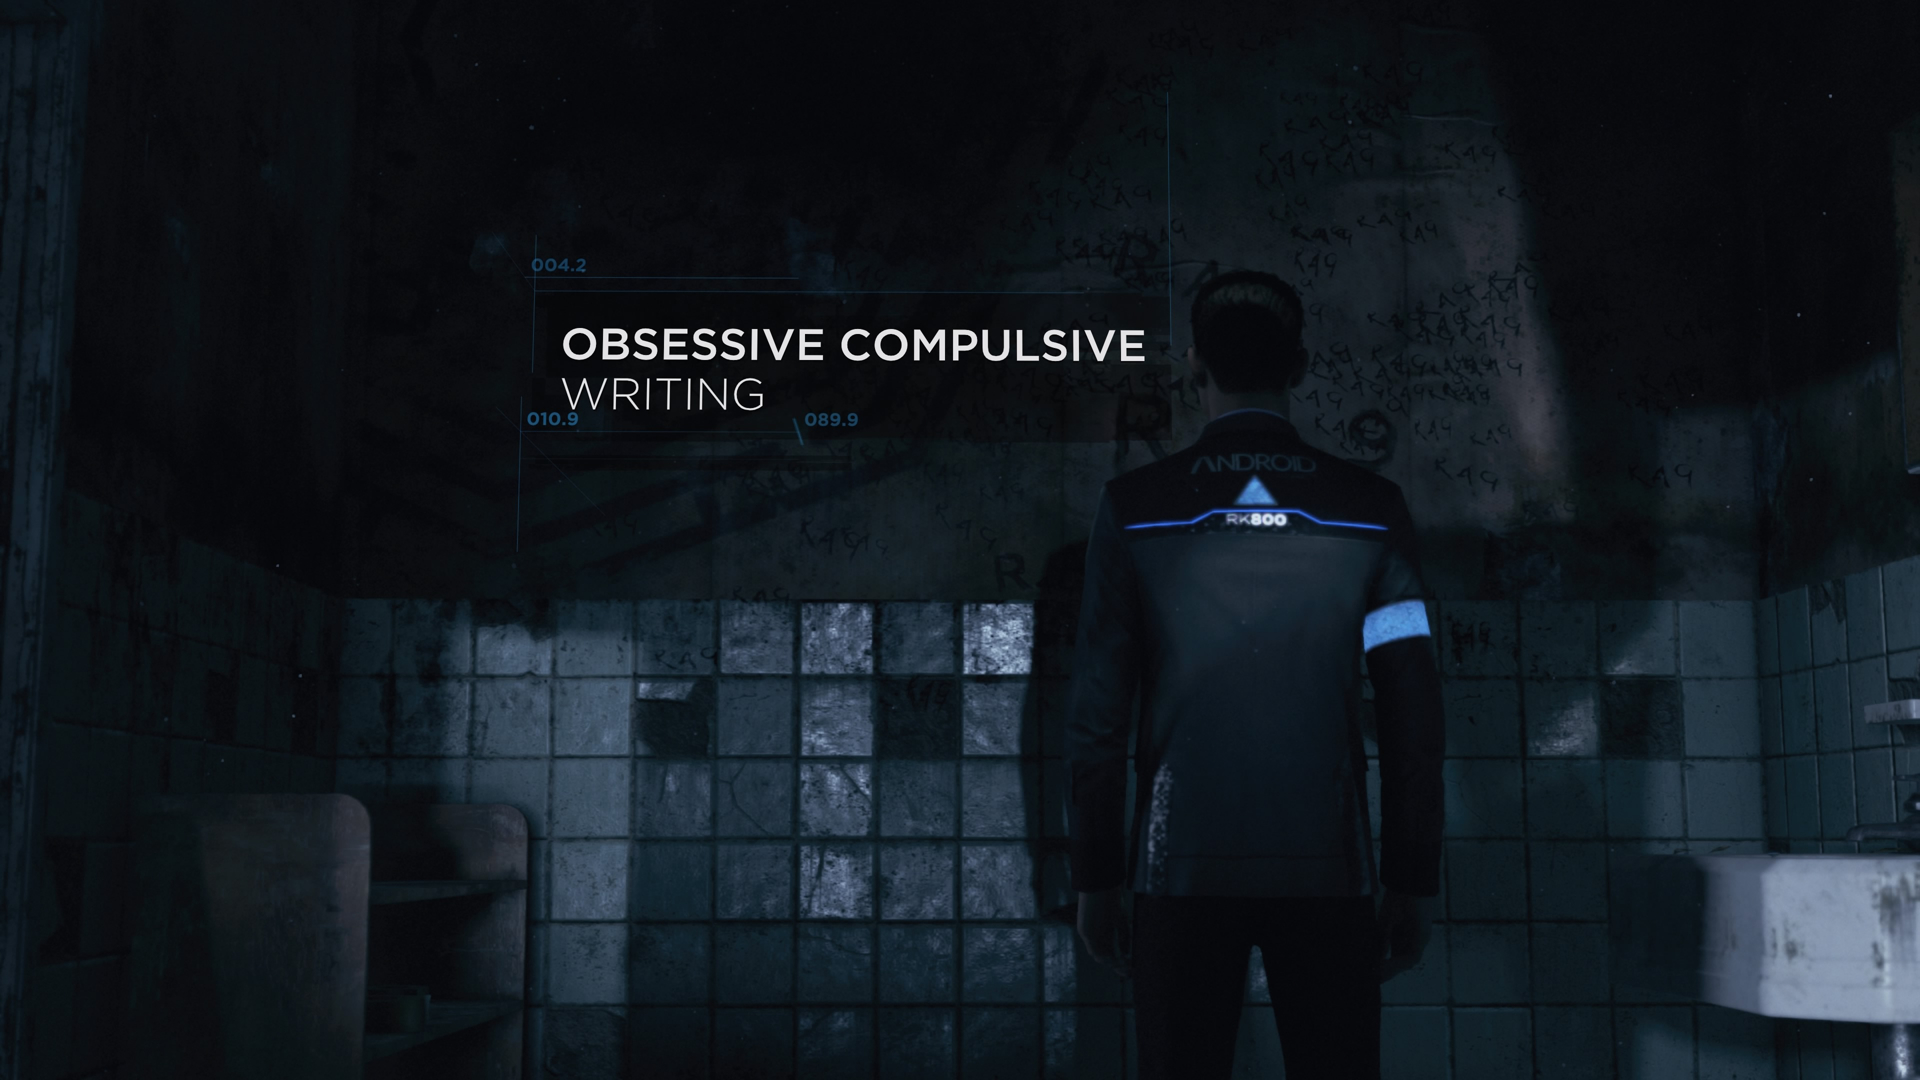 What does it mean to be alive? -- Detroit: Become Human review — GAMINGTREND